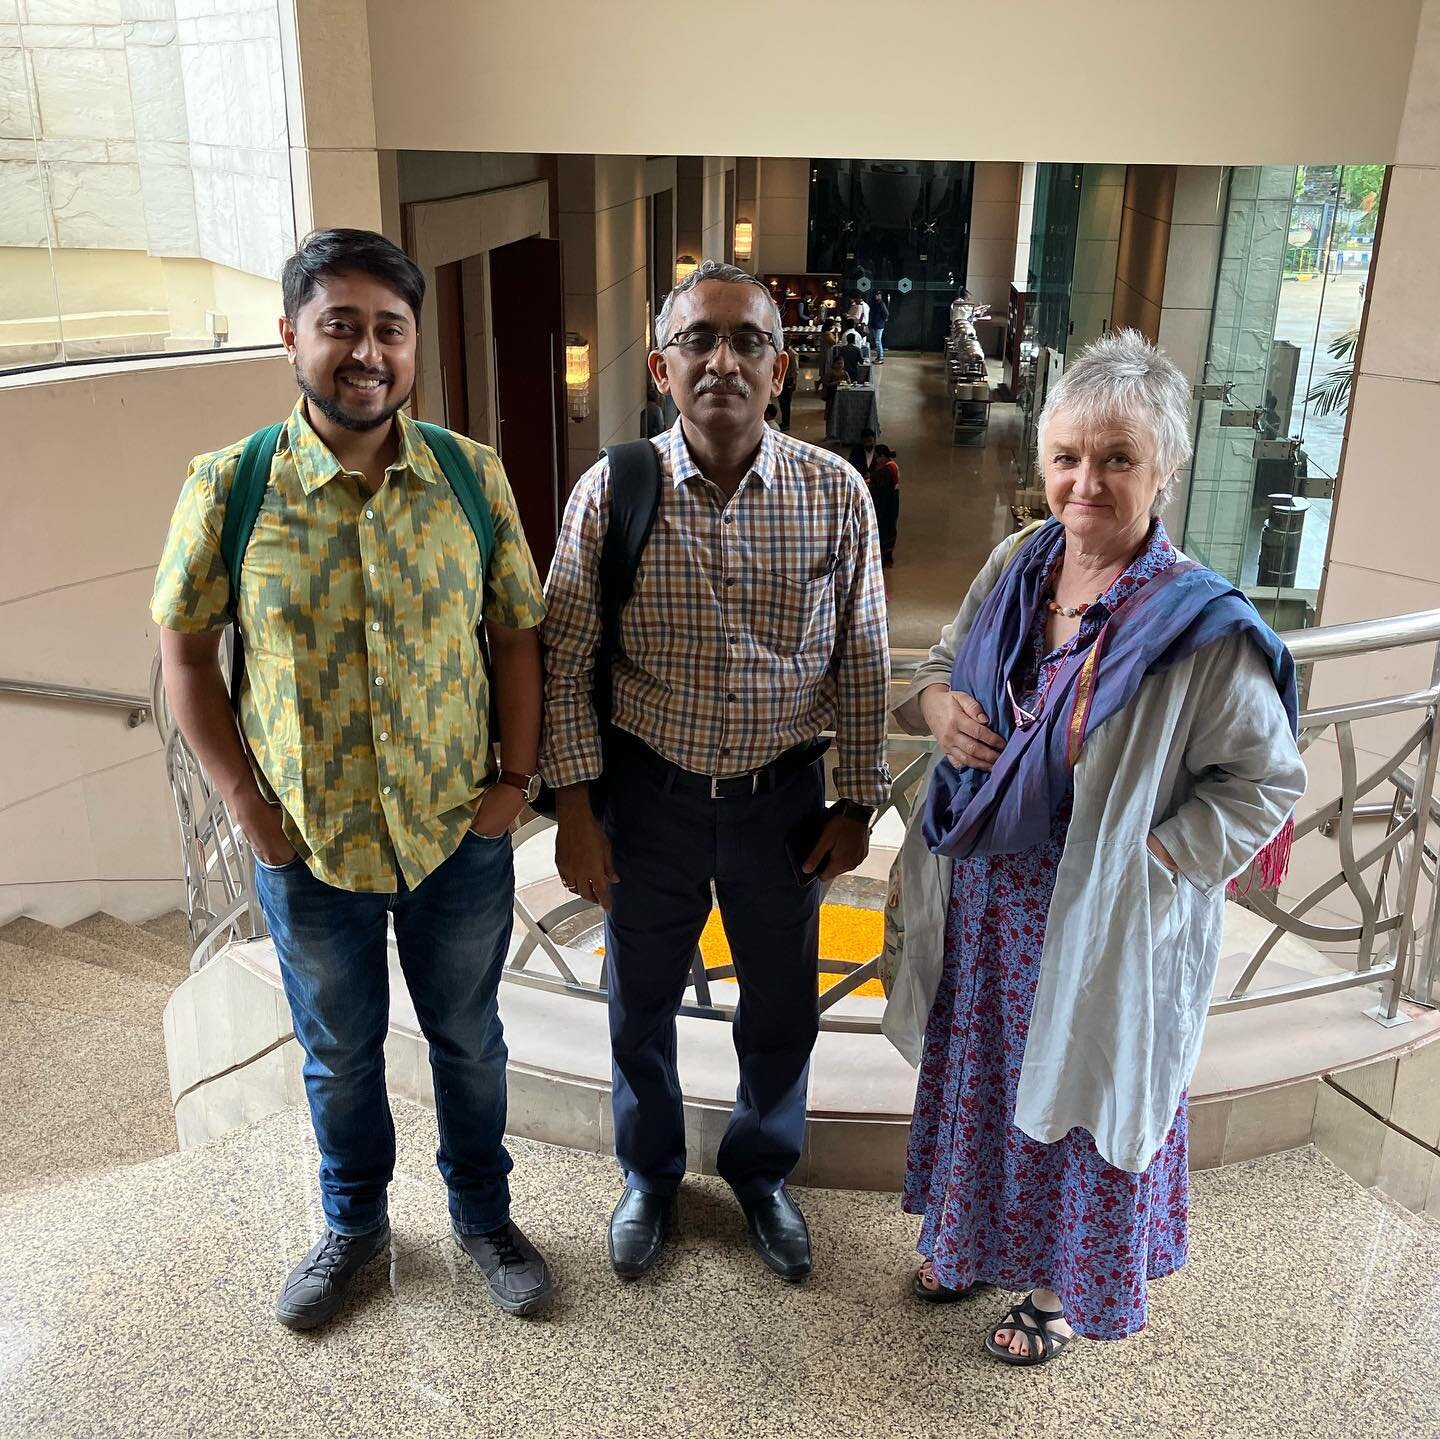 Living Delta Creative Representations team have arrived in Kolkata and preparing to present on our work in the GBM delta in today&rsquo;s Net Zero conference organised by the Bengal Chamber and UK Government. #livingdeltas #bengalchamberofcommerce #u